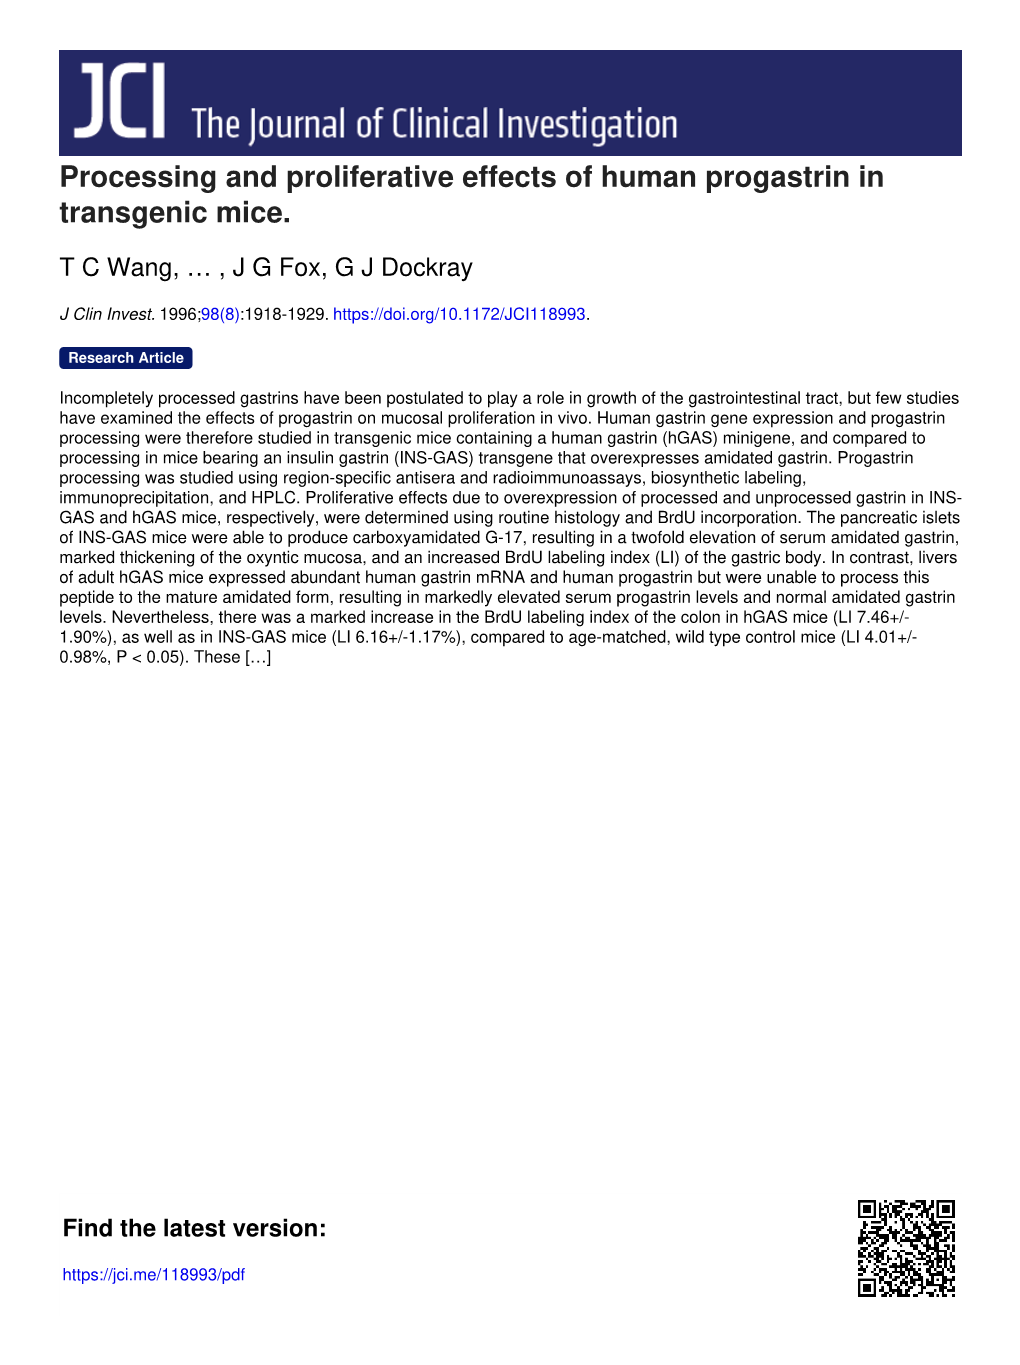 Processing and Proliferative Effects of Human Progastrin in Transgenic Mice